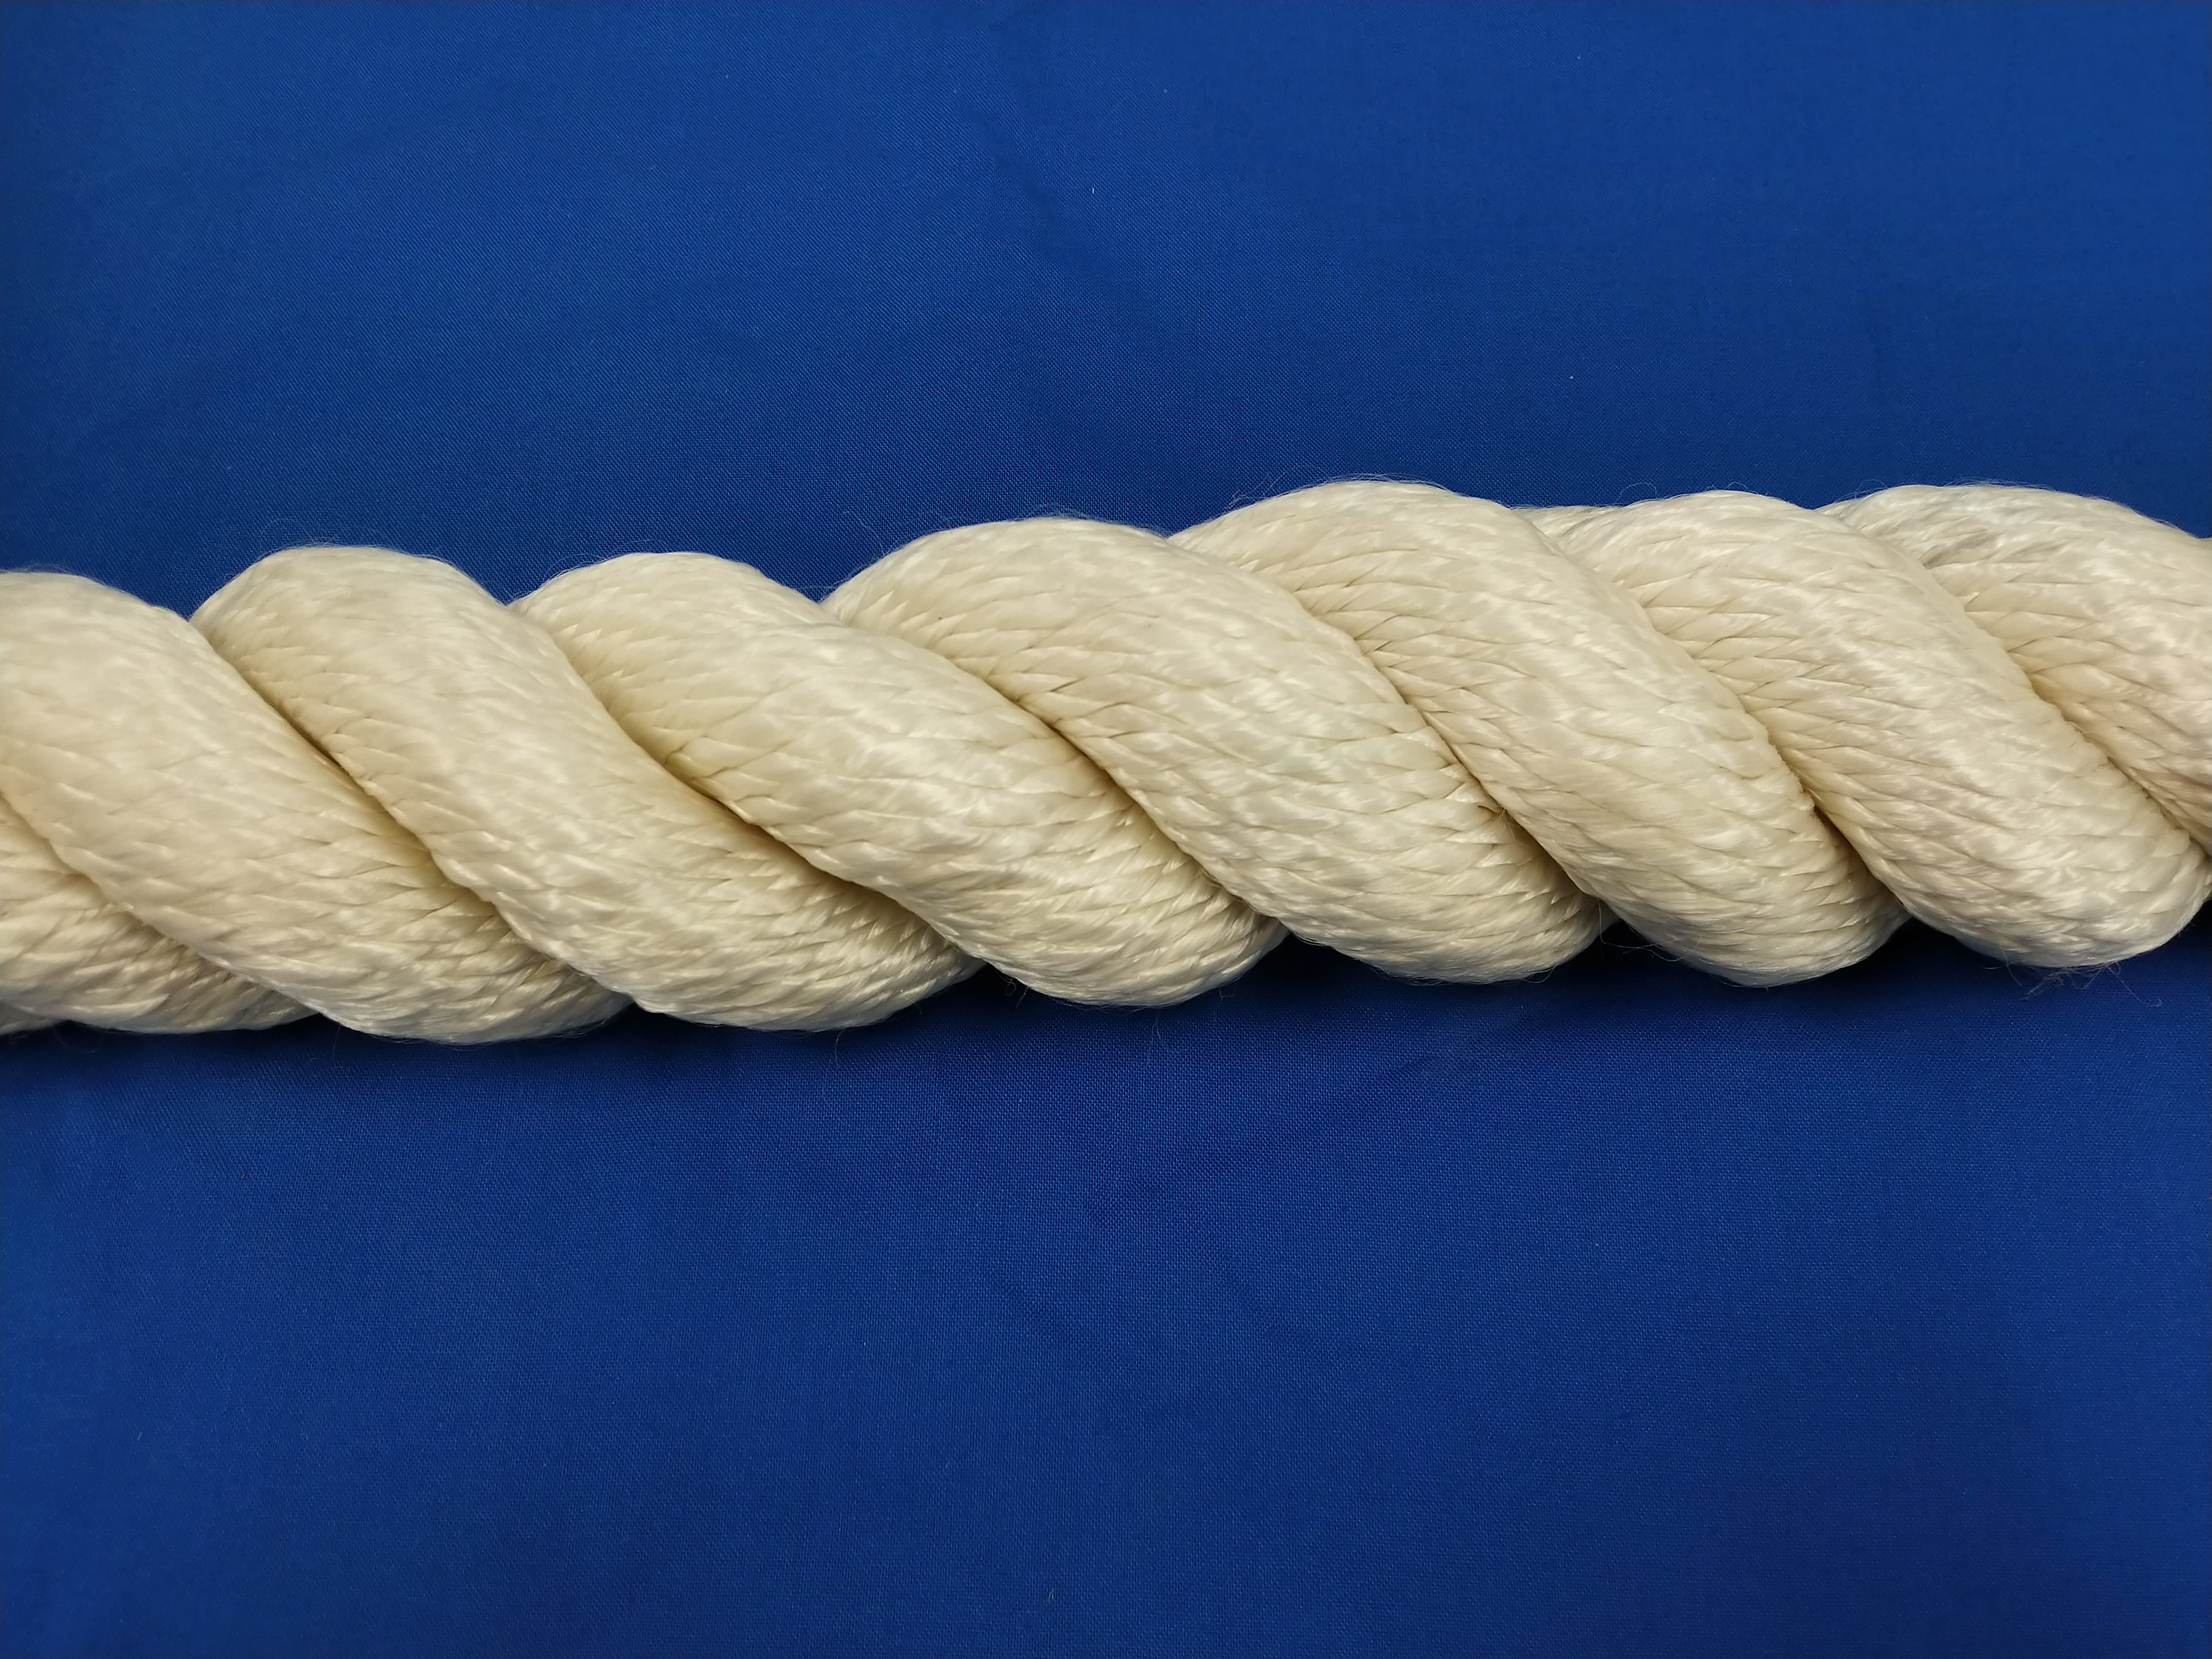 3-Strand Twisted Rope and 8-Strand Plaited Nylon Rope On